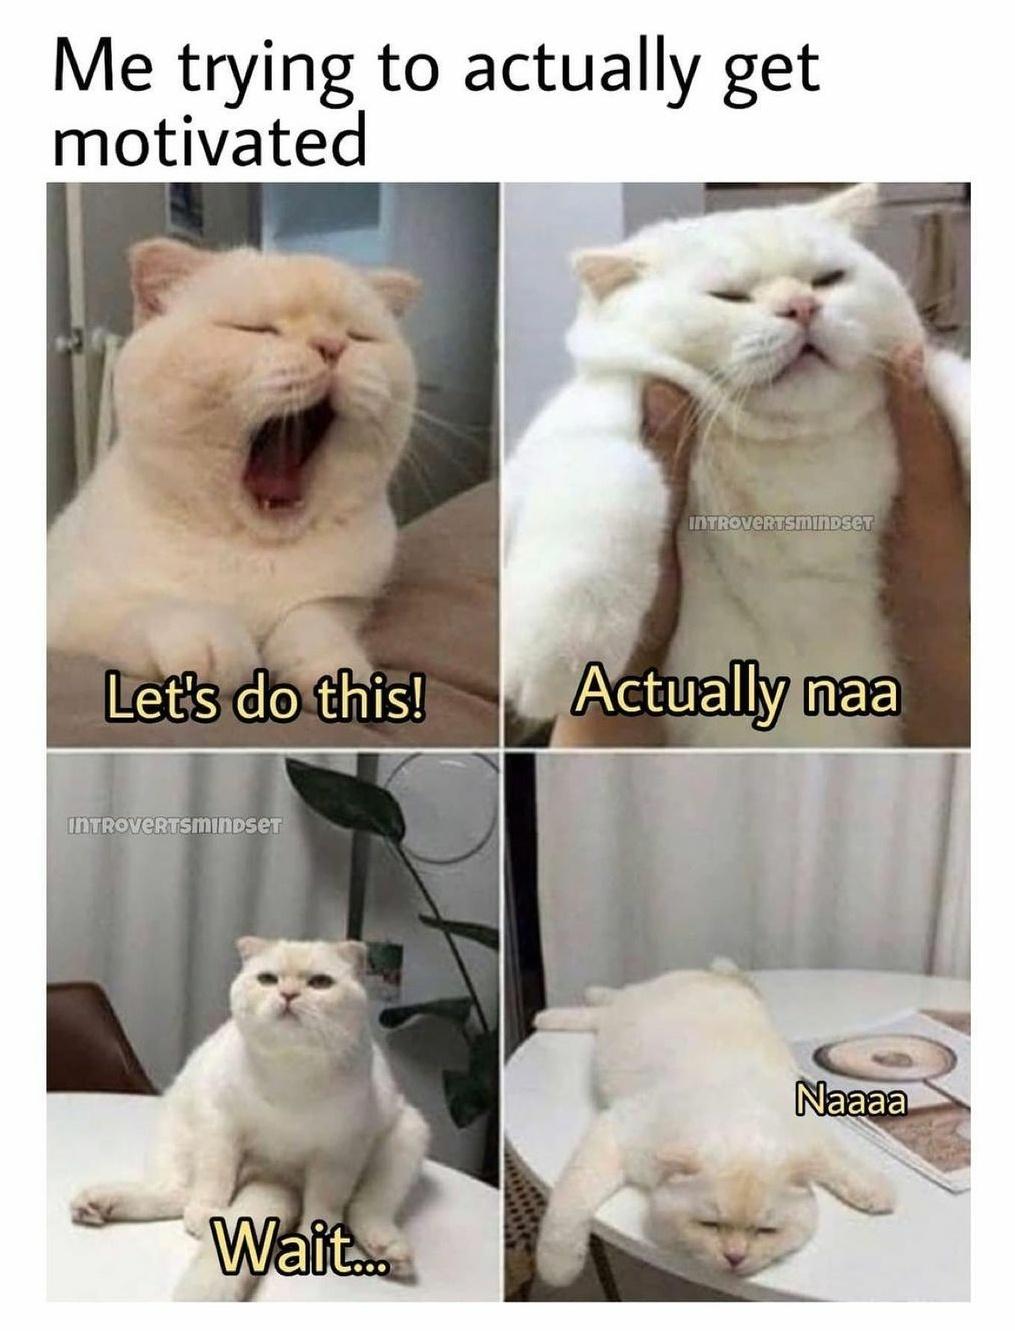 fresh memes - cat is my spirit animal - Me trying to actually get motivated INTROVERusmindset Let's do this! Actually naa INTROVERusmindset Naaaa Wait...